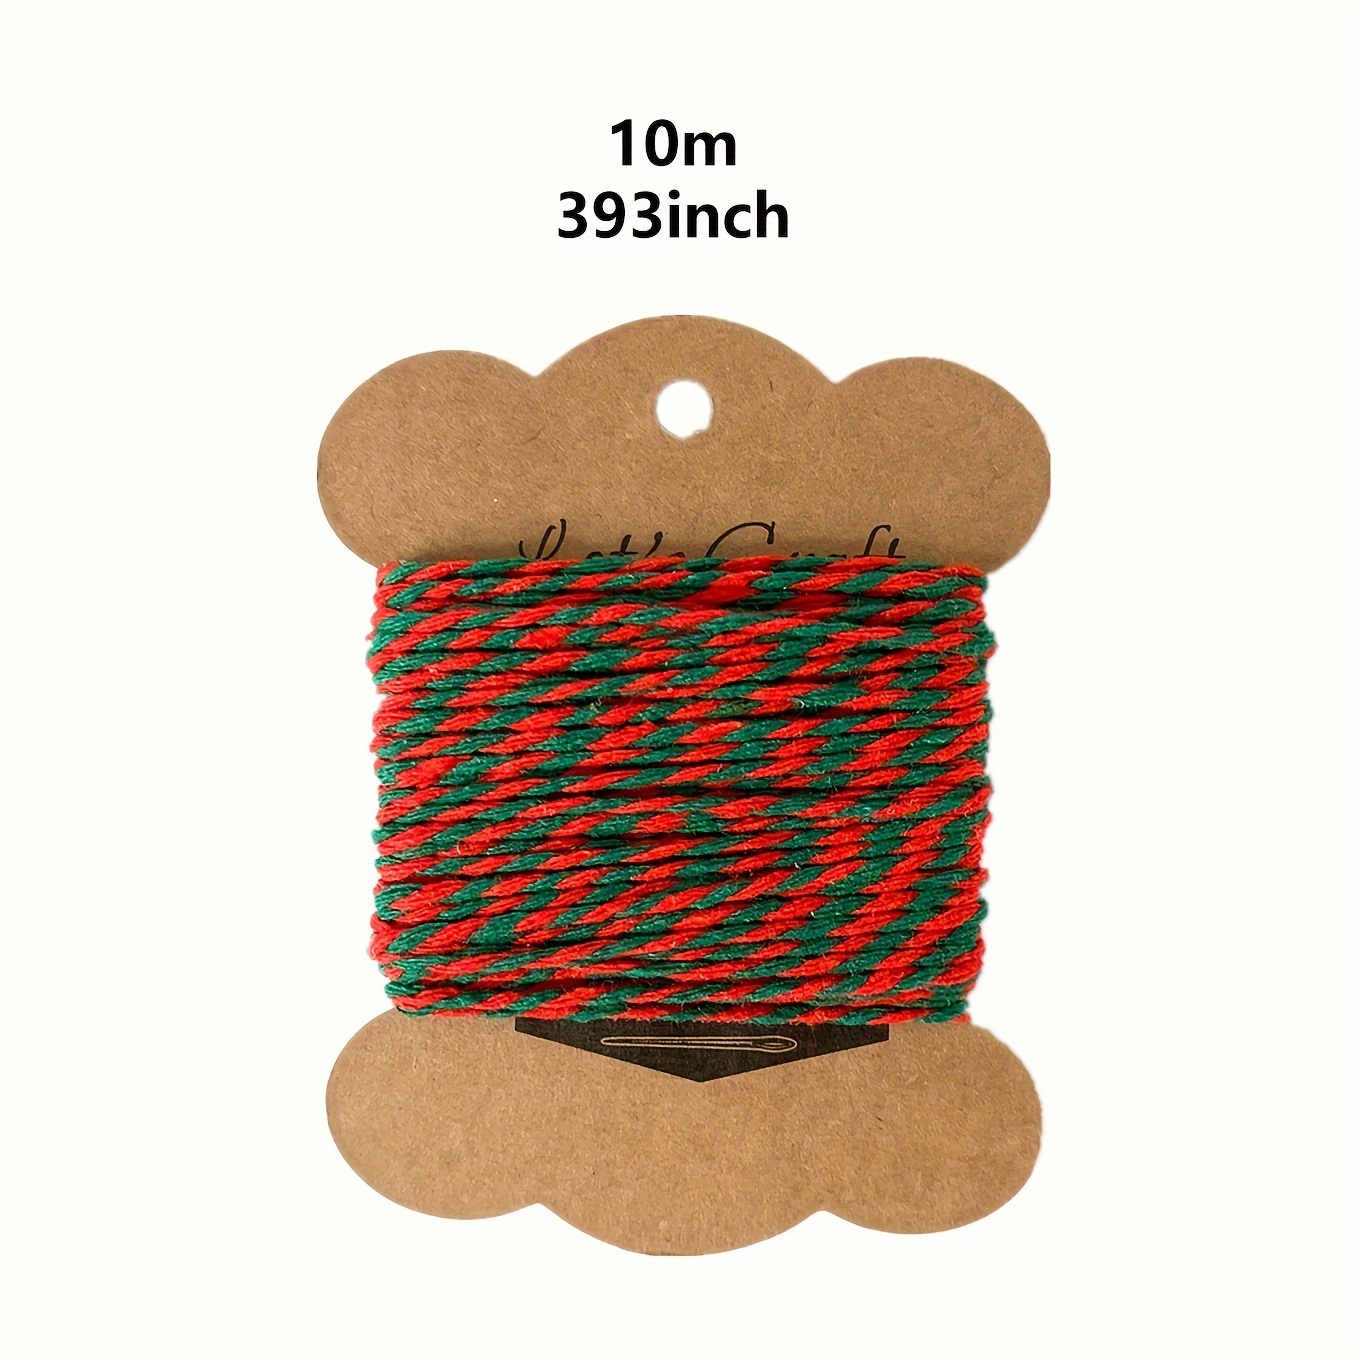 2mm Cotton Twine Rope,Wine Red String Bakers Twine for DIY Crafts